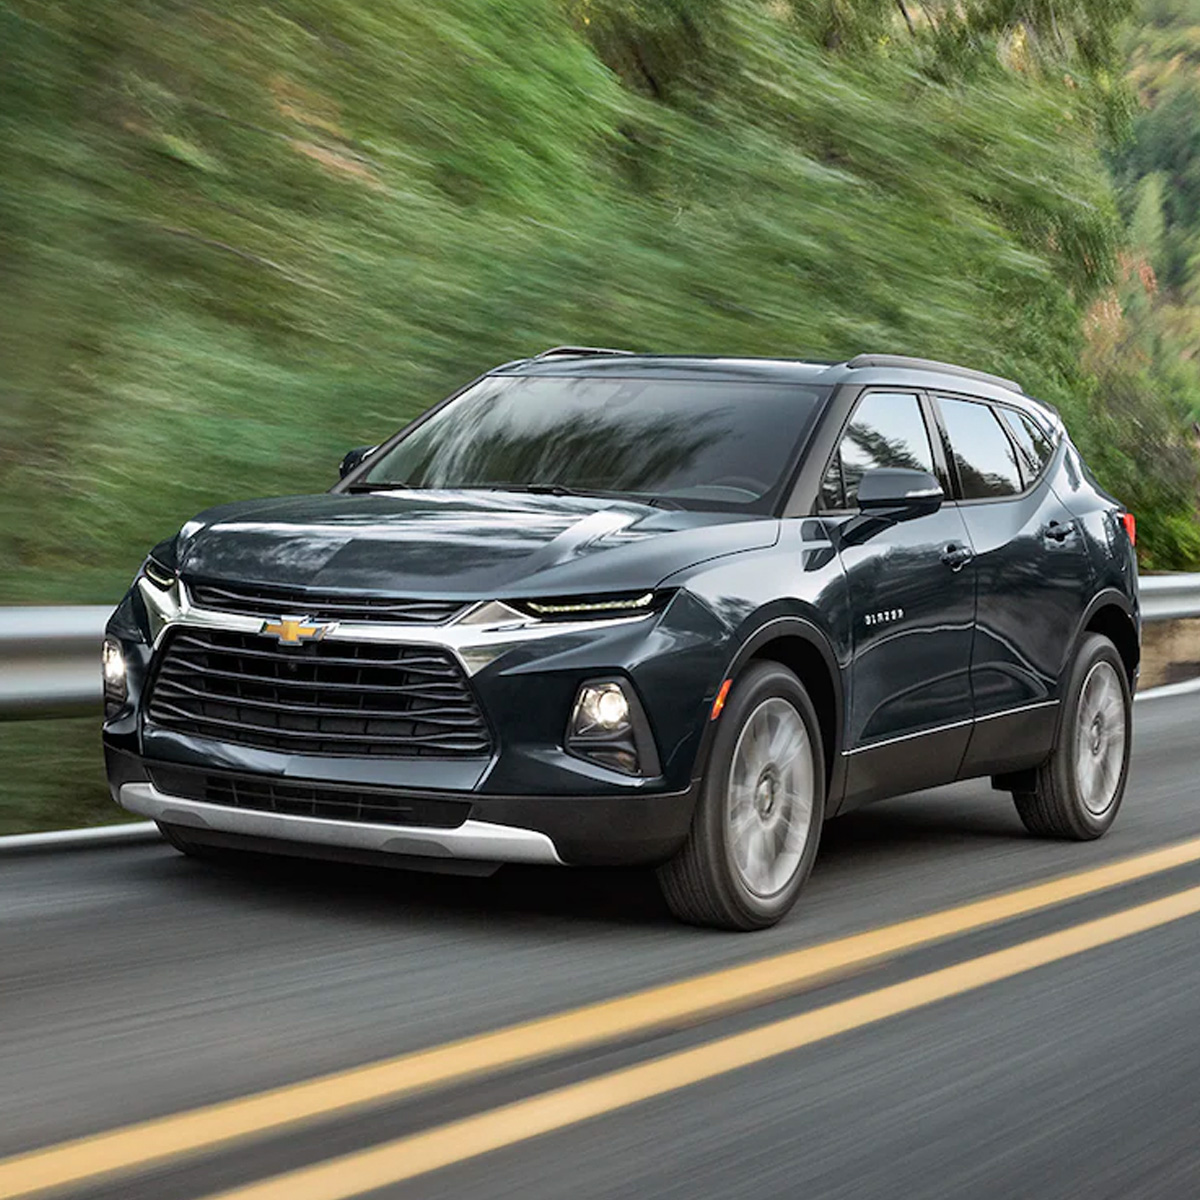 2022 Chevy Blazer driving down a country highway